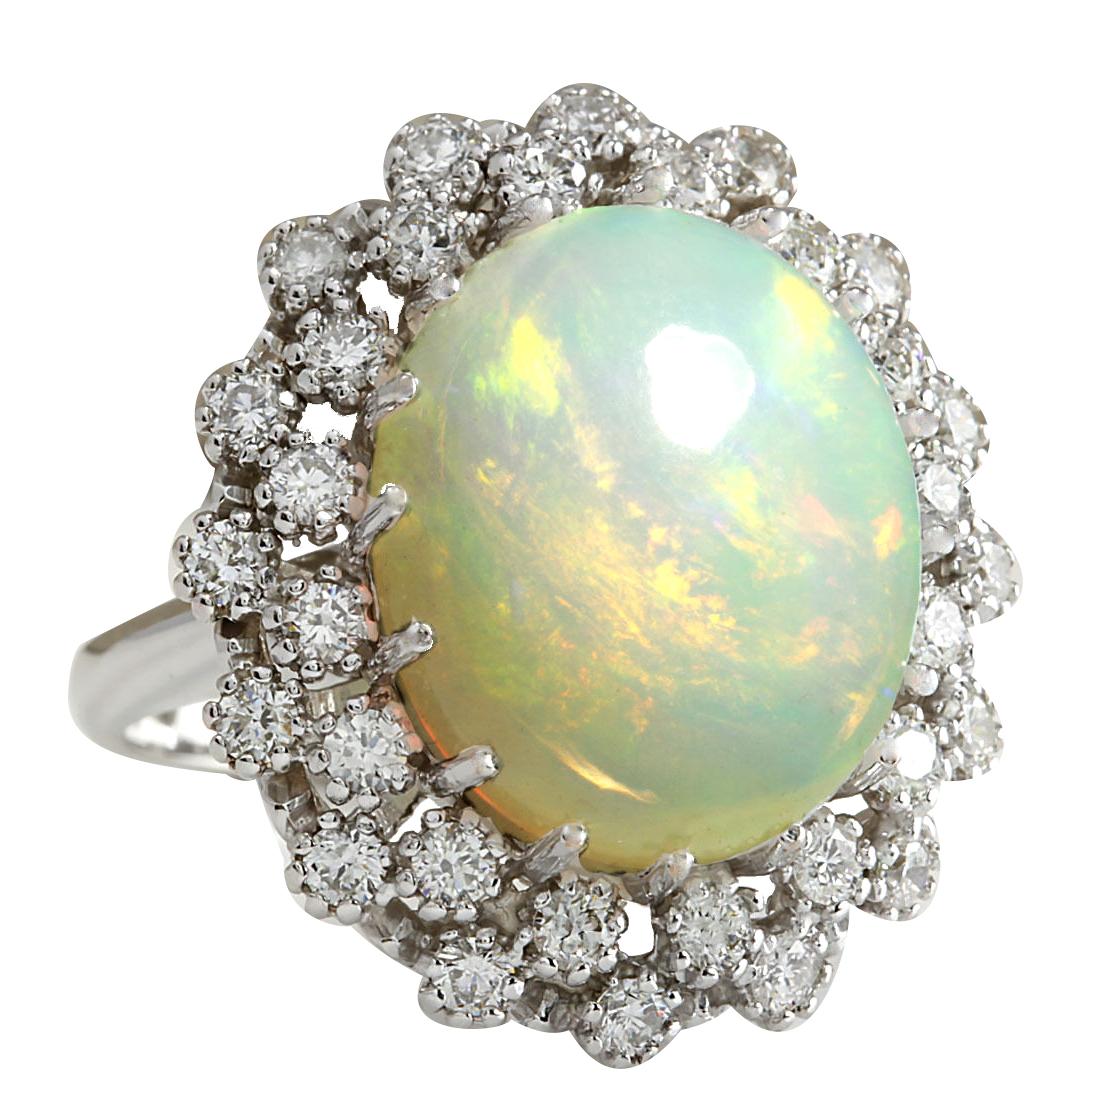 11.98 Carat Opal 14 Karat White Gold Diamond Ring
Stamped: 14K White Gold
Total Ring Weight: 12.7 Grams
Total  Opal Weight is 10.58 Carat (Measures: 17.00x13.00 mm)
Total Diamond Weight is 1.40 Carat
Color: F-G, Clarity: VS2-SI1
Face Measures: